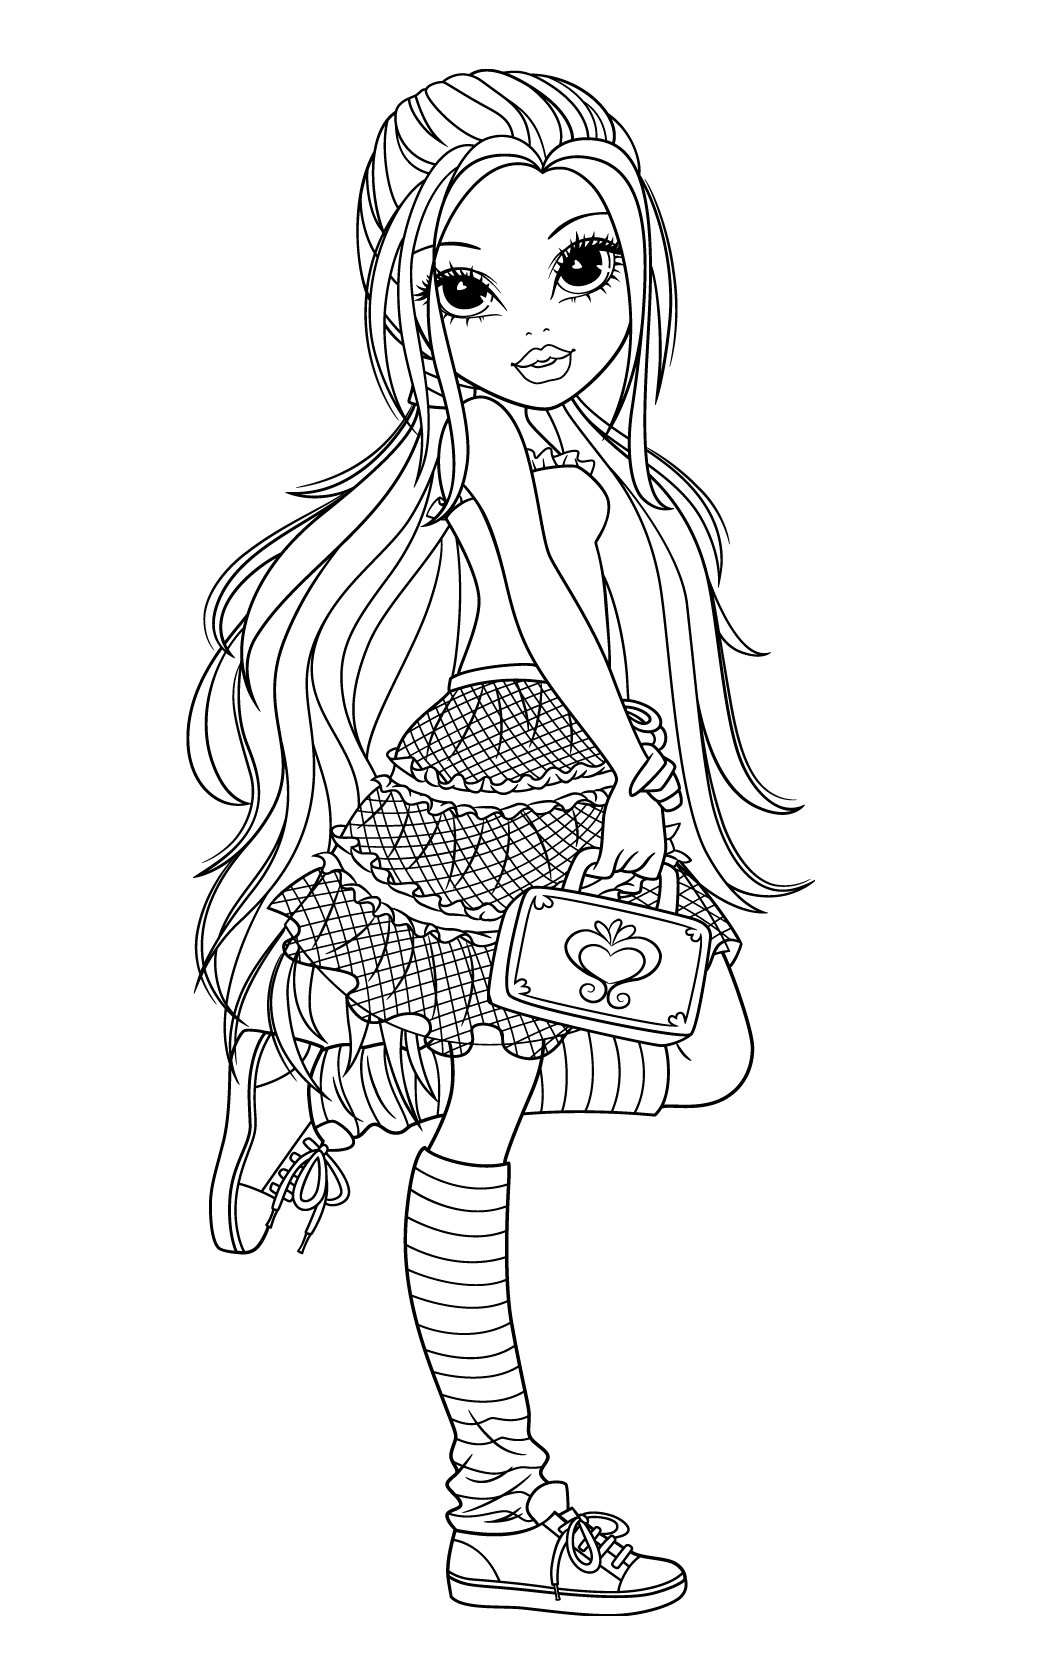 Coloring Pages For Girls People
 New Moxie Girlz Coloring Pages will be added frequently so